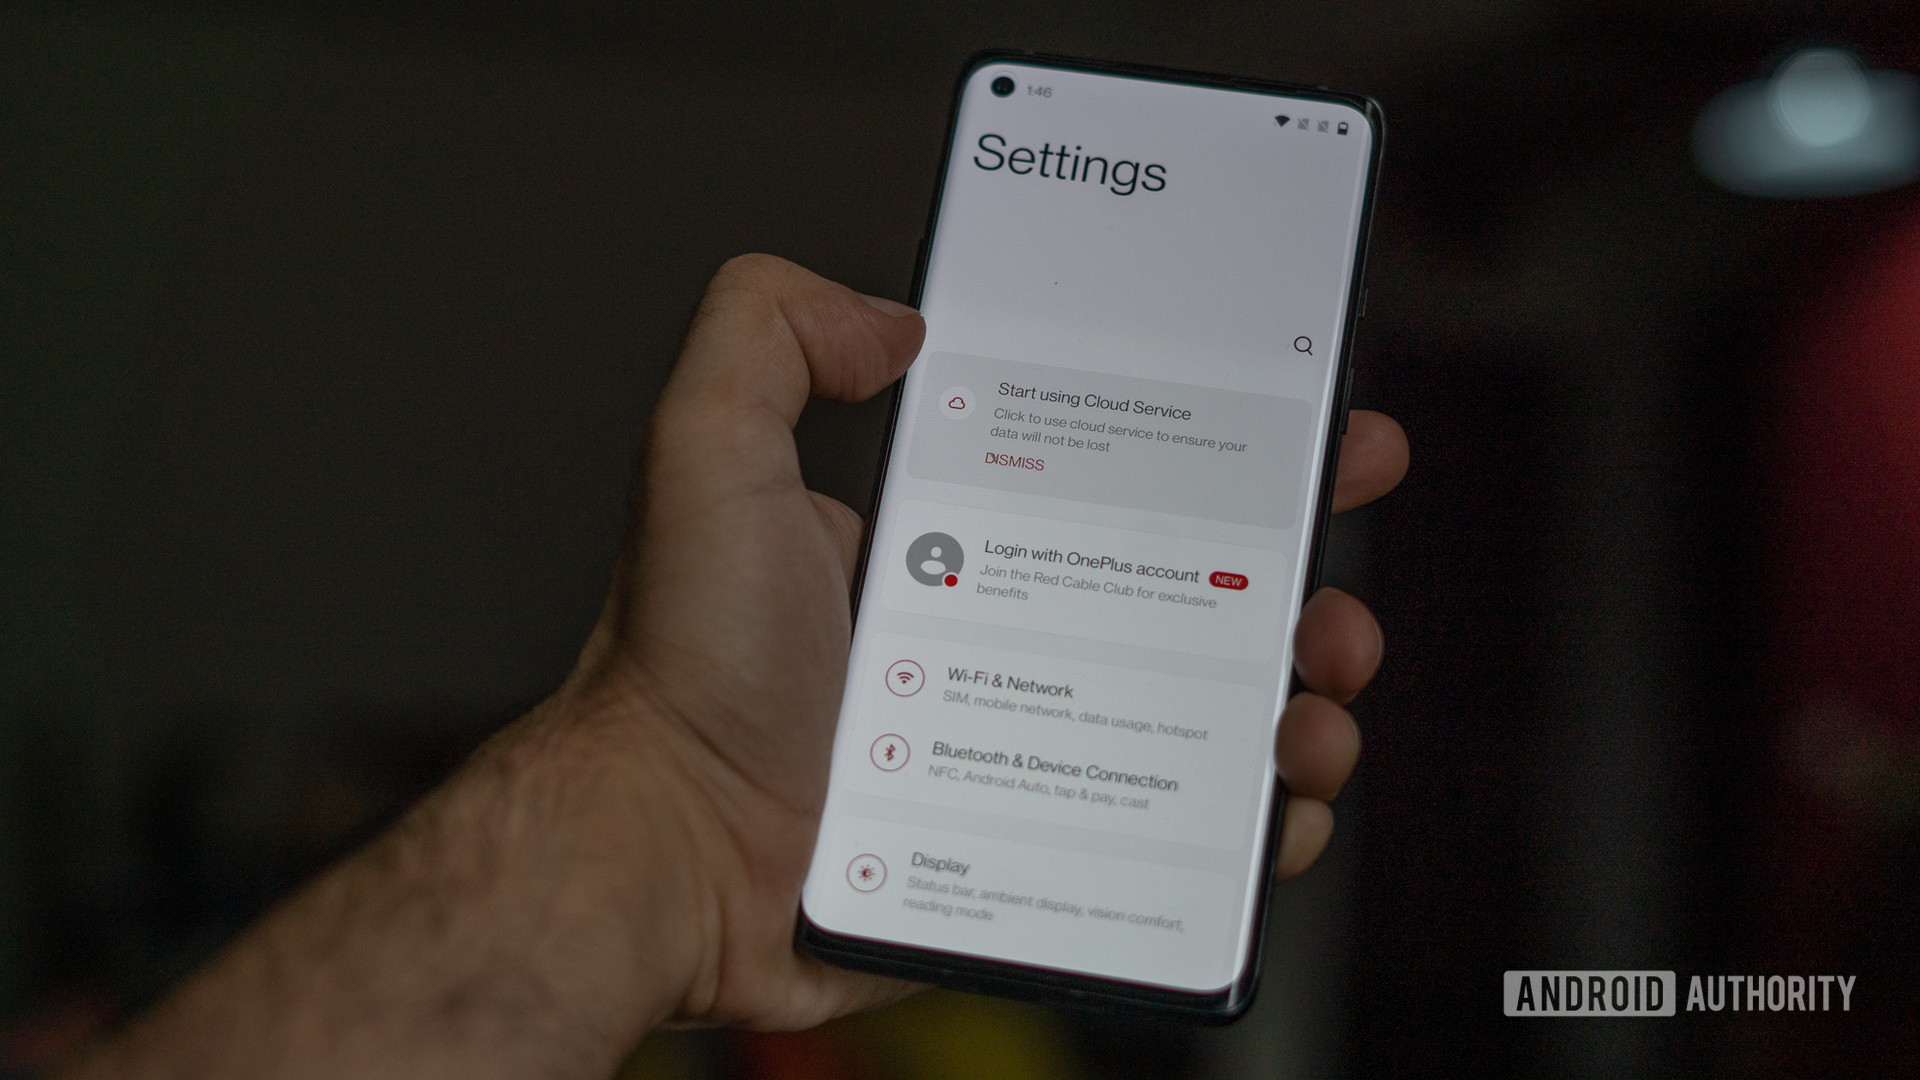 OnePlus Oxygen OS 11 Android 11 settings